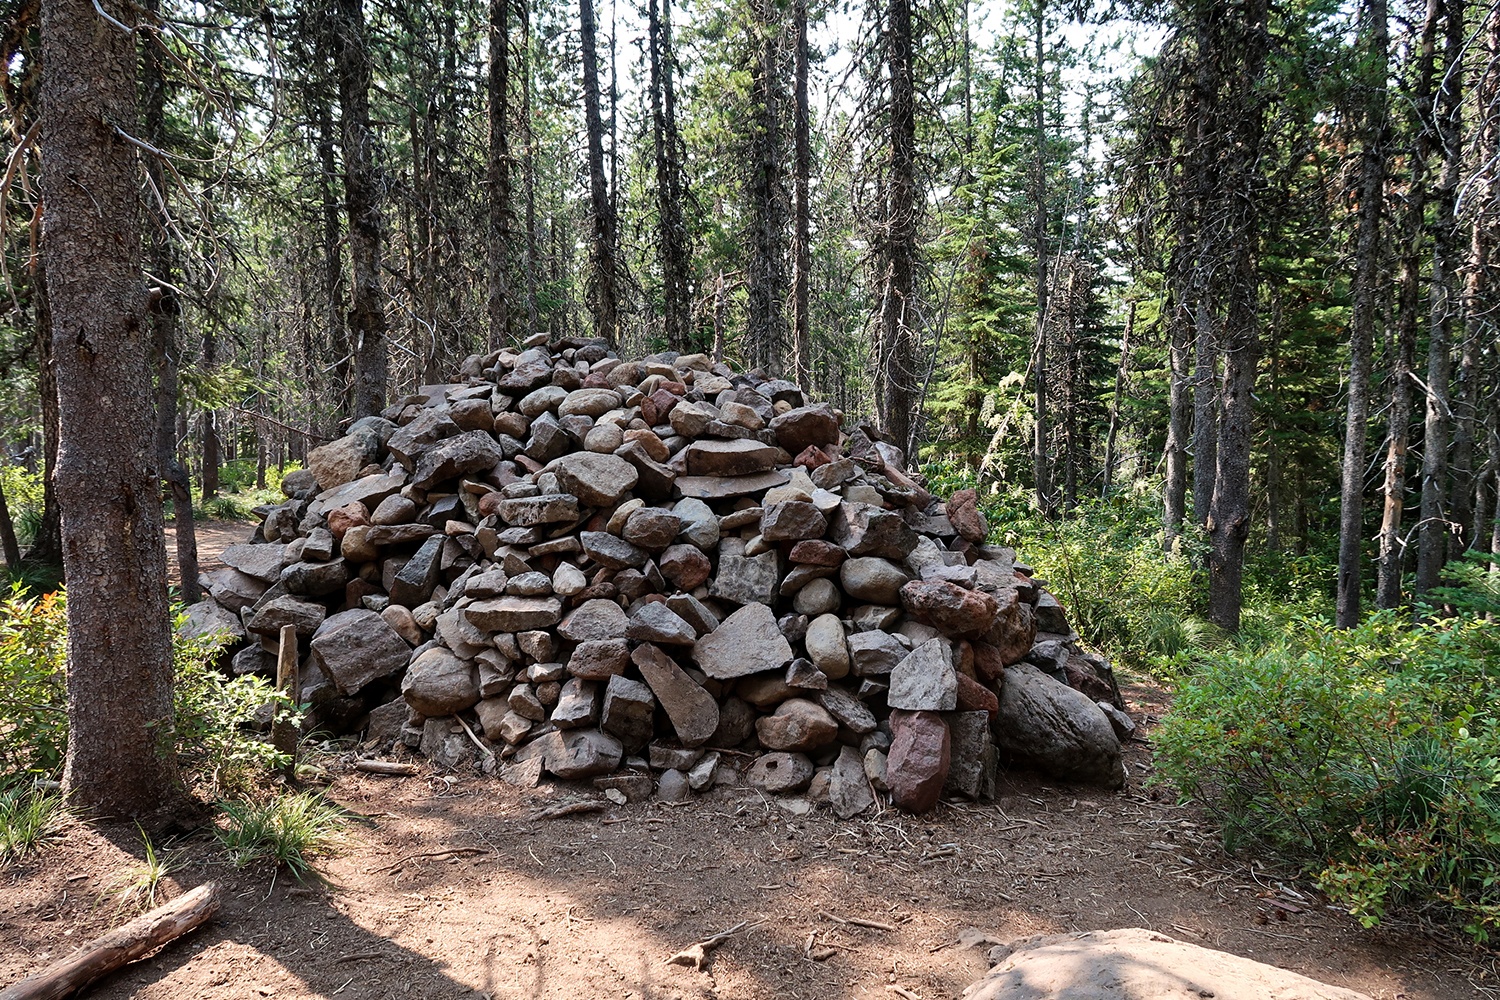 Pile of rocks on the Tom Dick and Harry Mountain trail